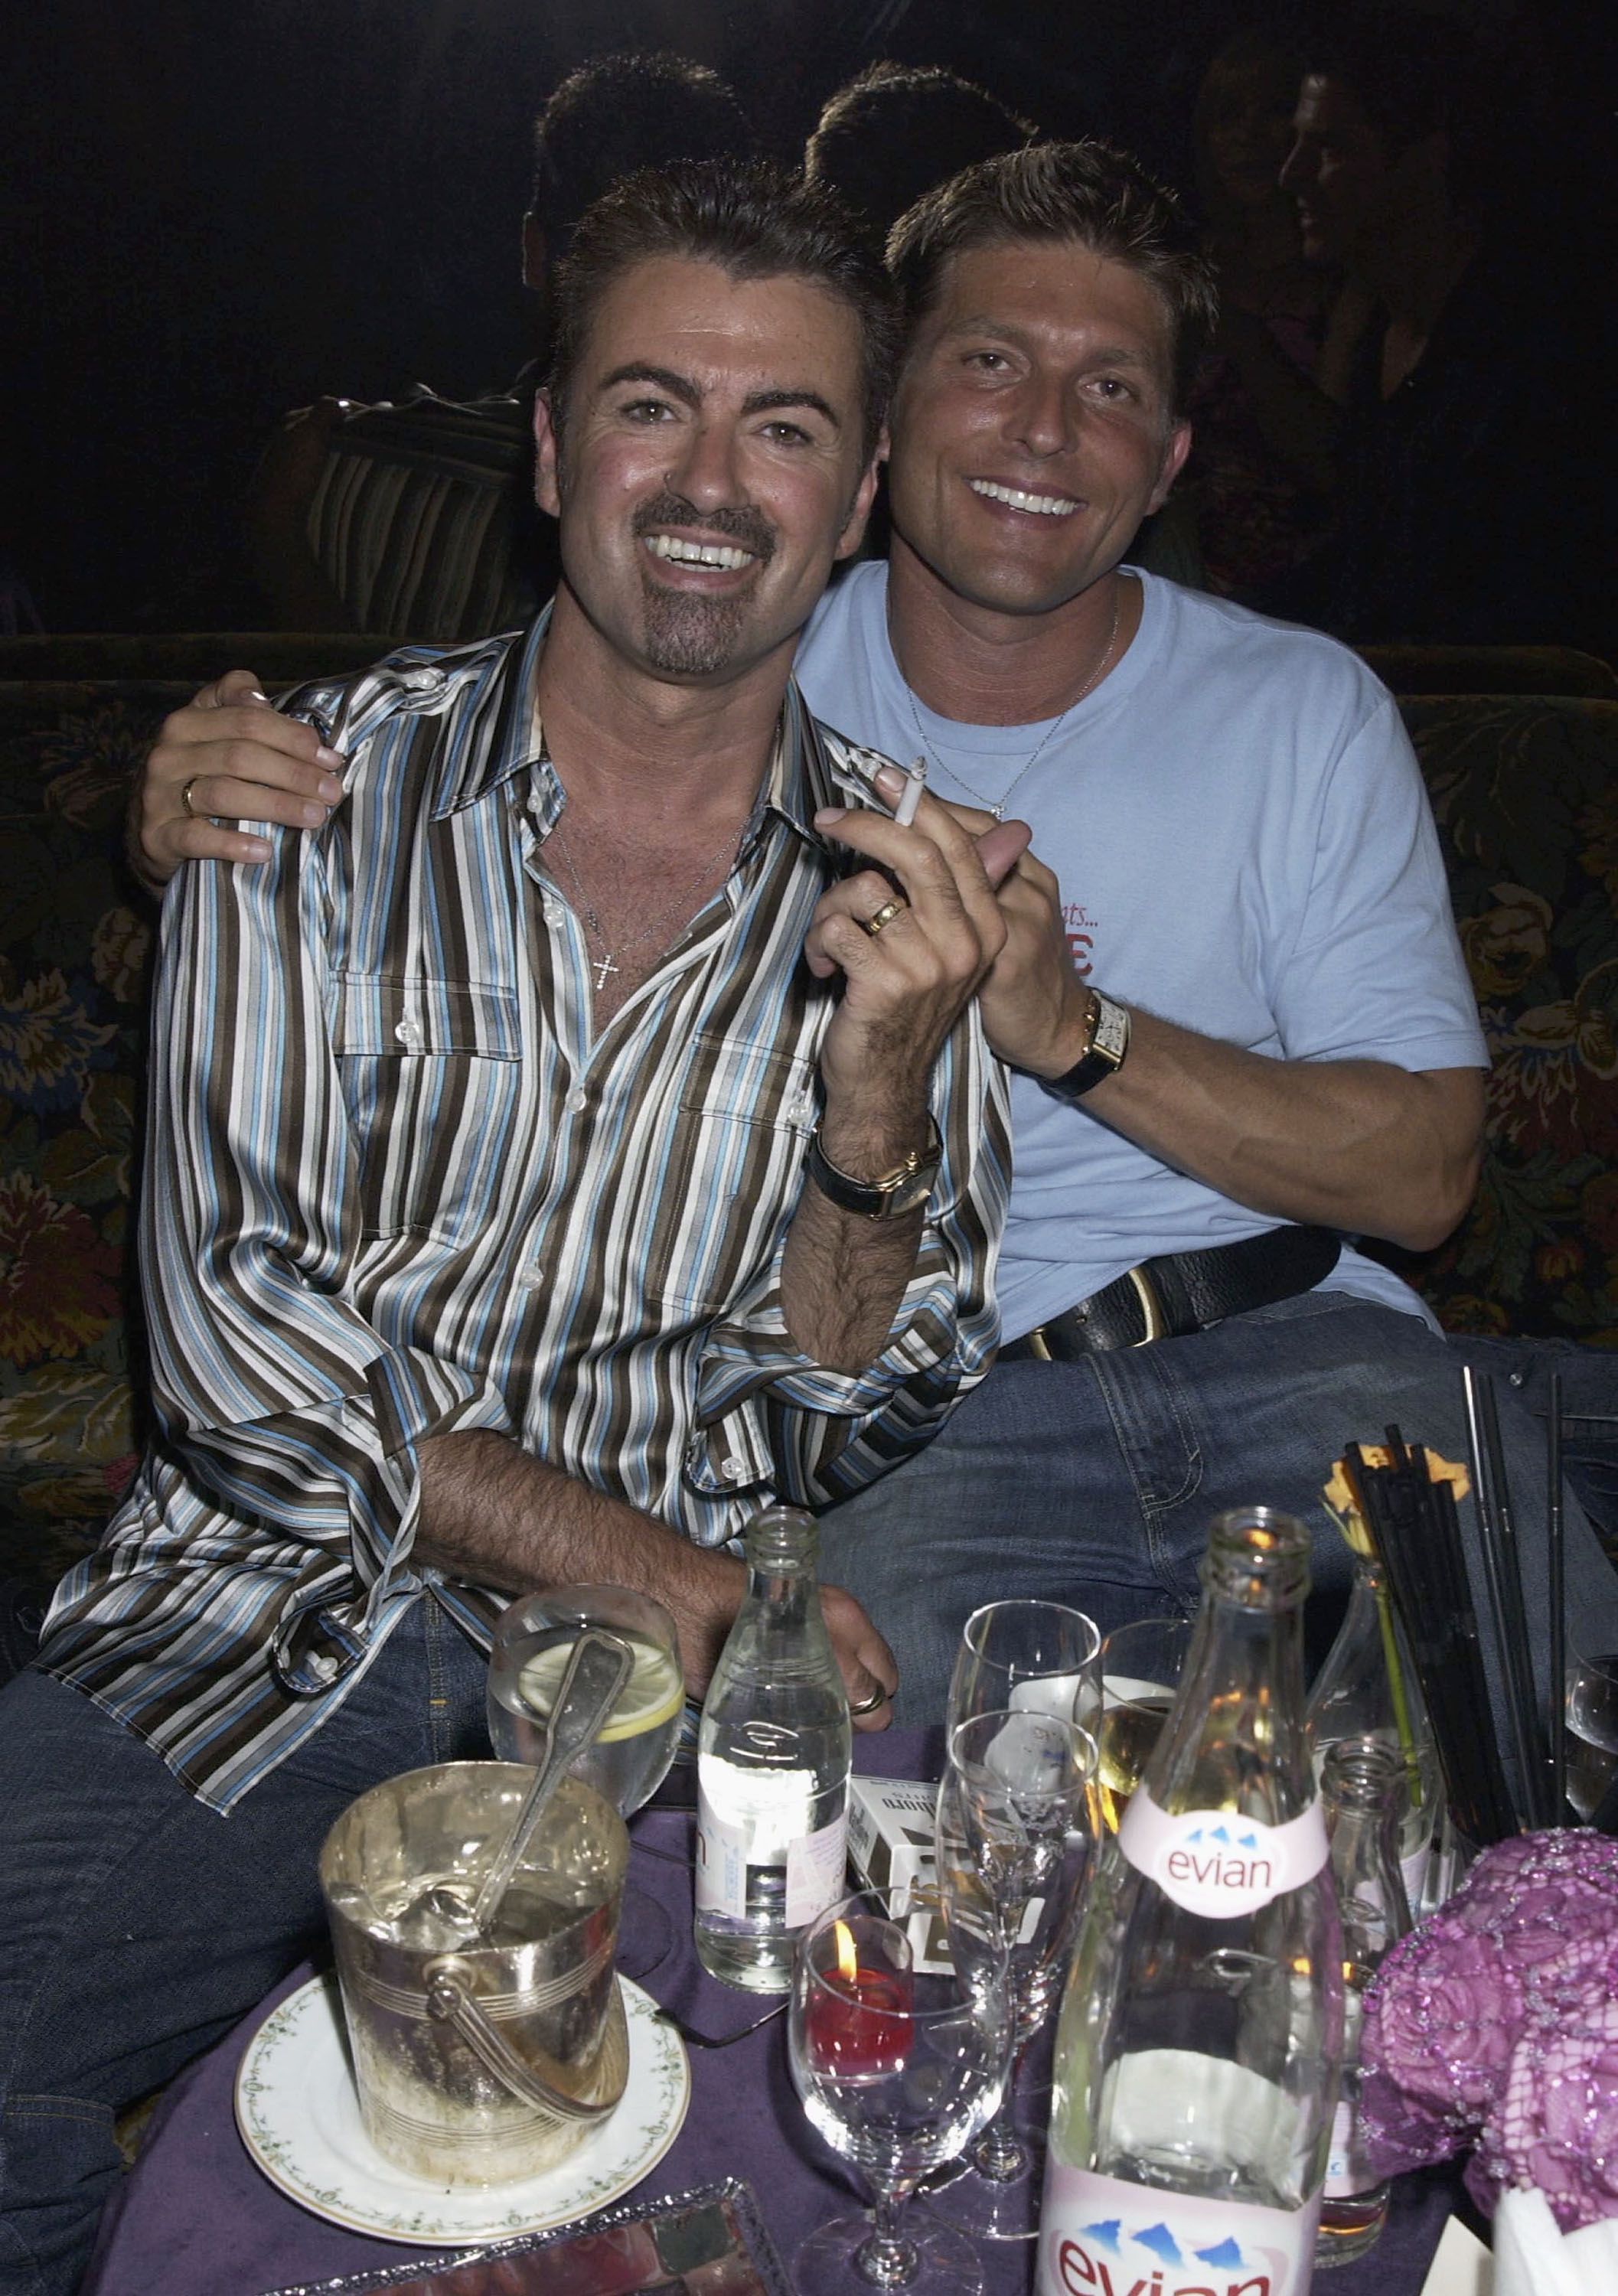 George Michael and Kenny Goss